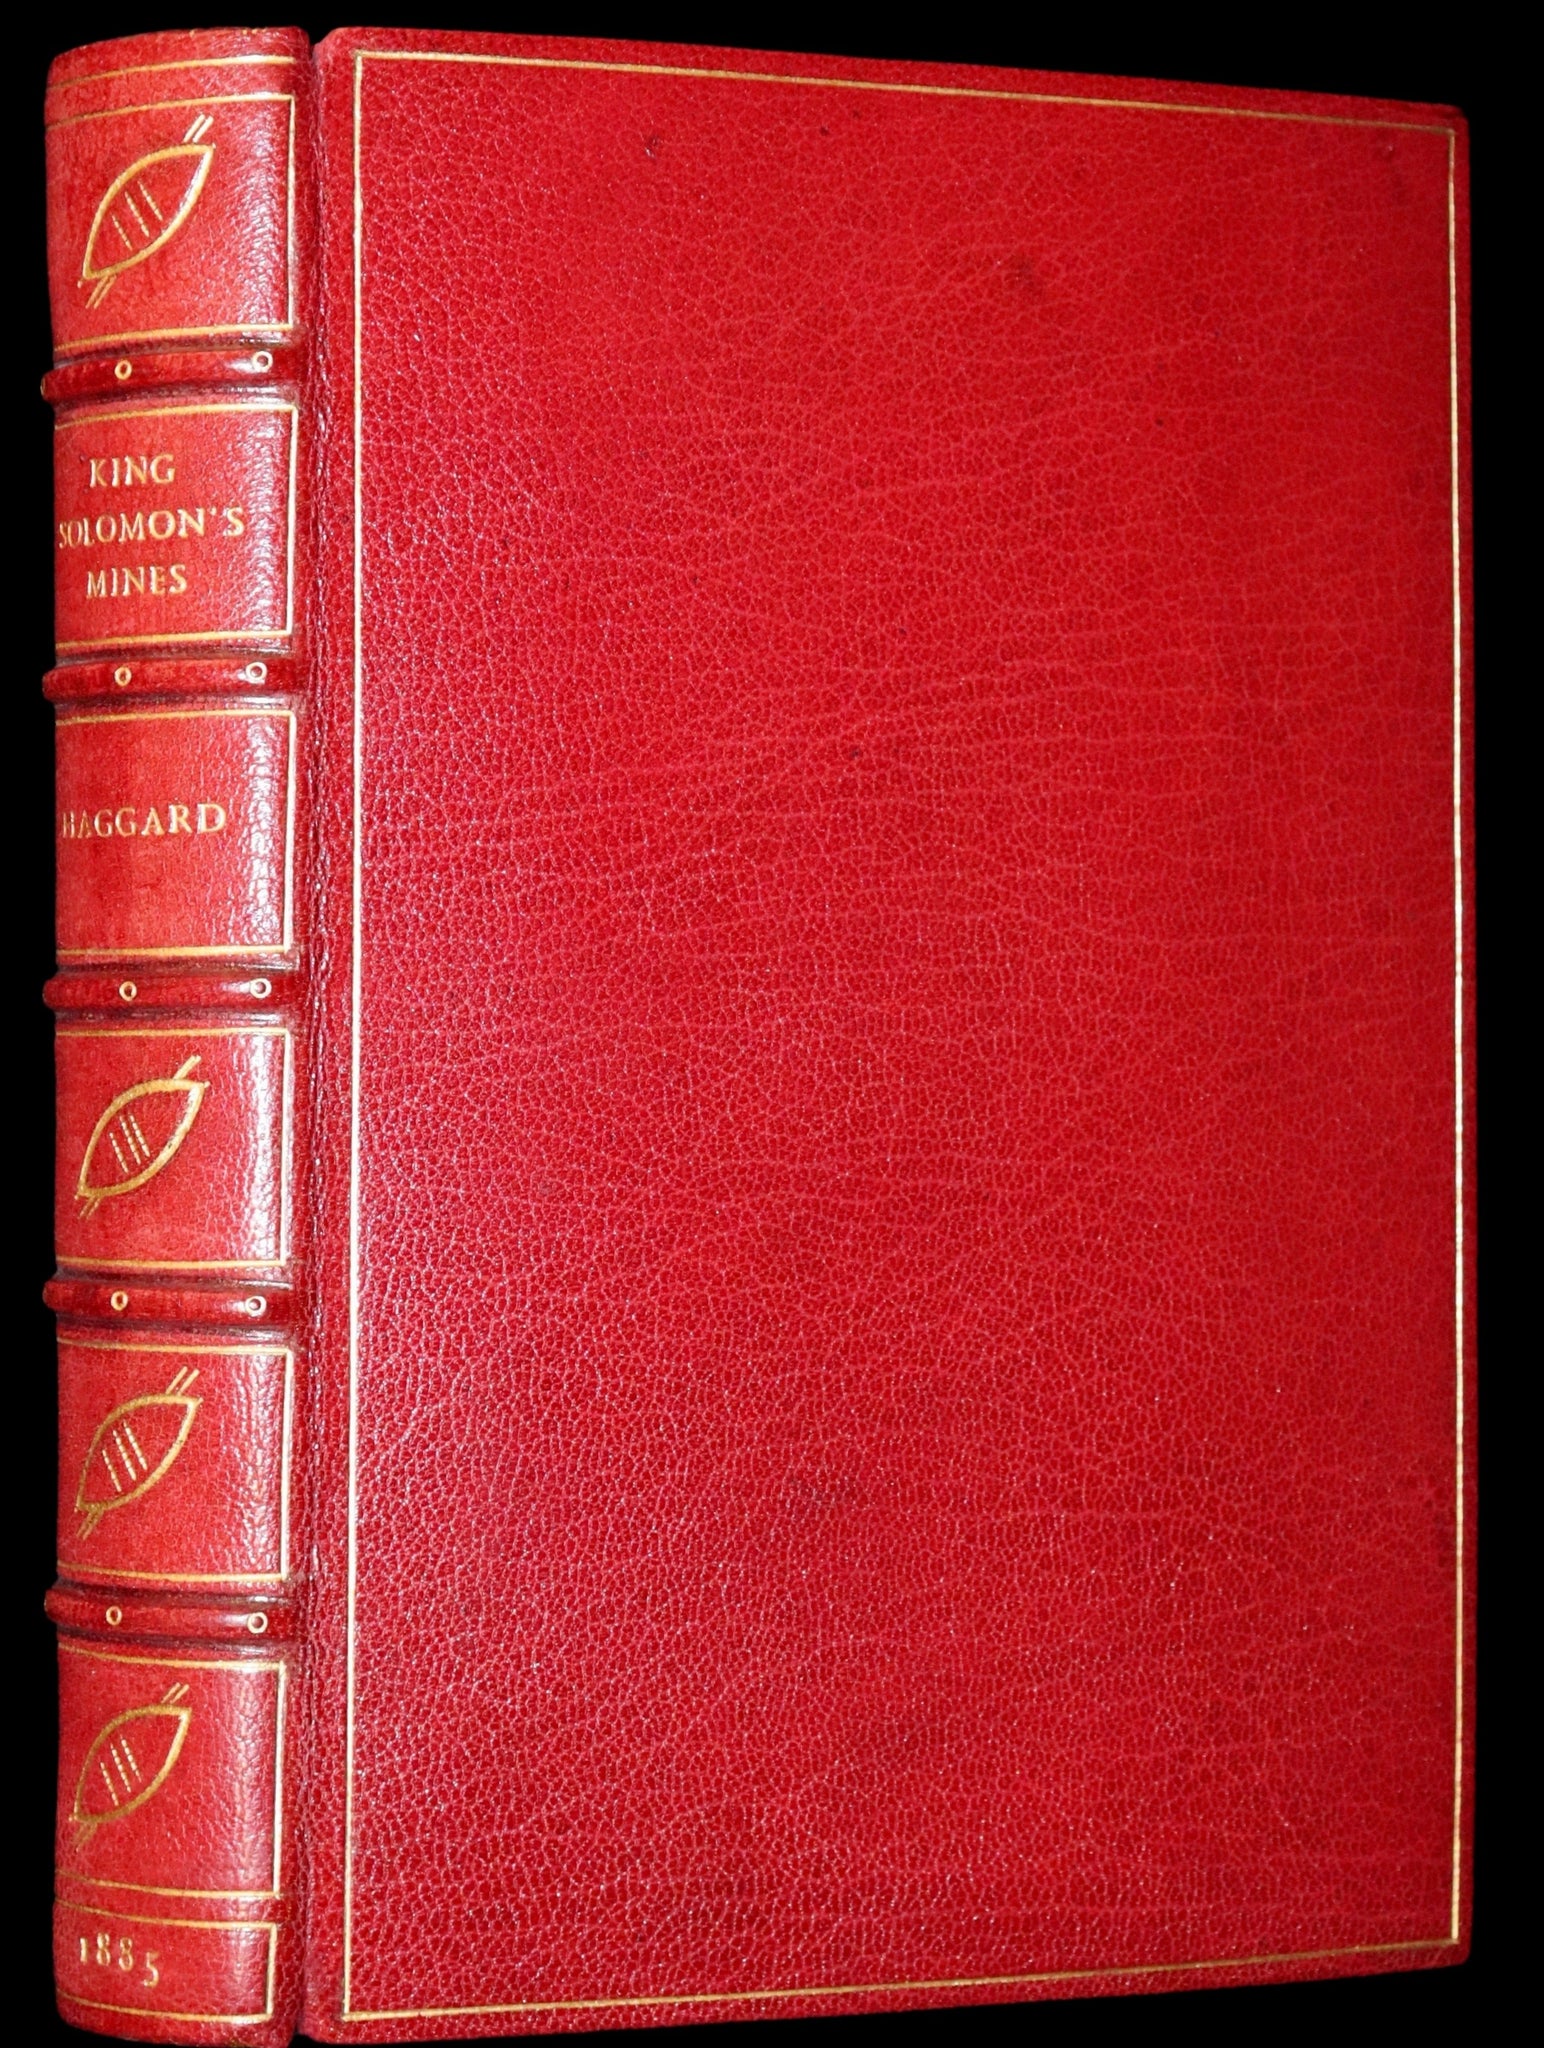 1885 Rare First Edition bound by Bayntun - King Solomon's Mines by Sir Henry Rider Haggard.